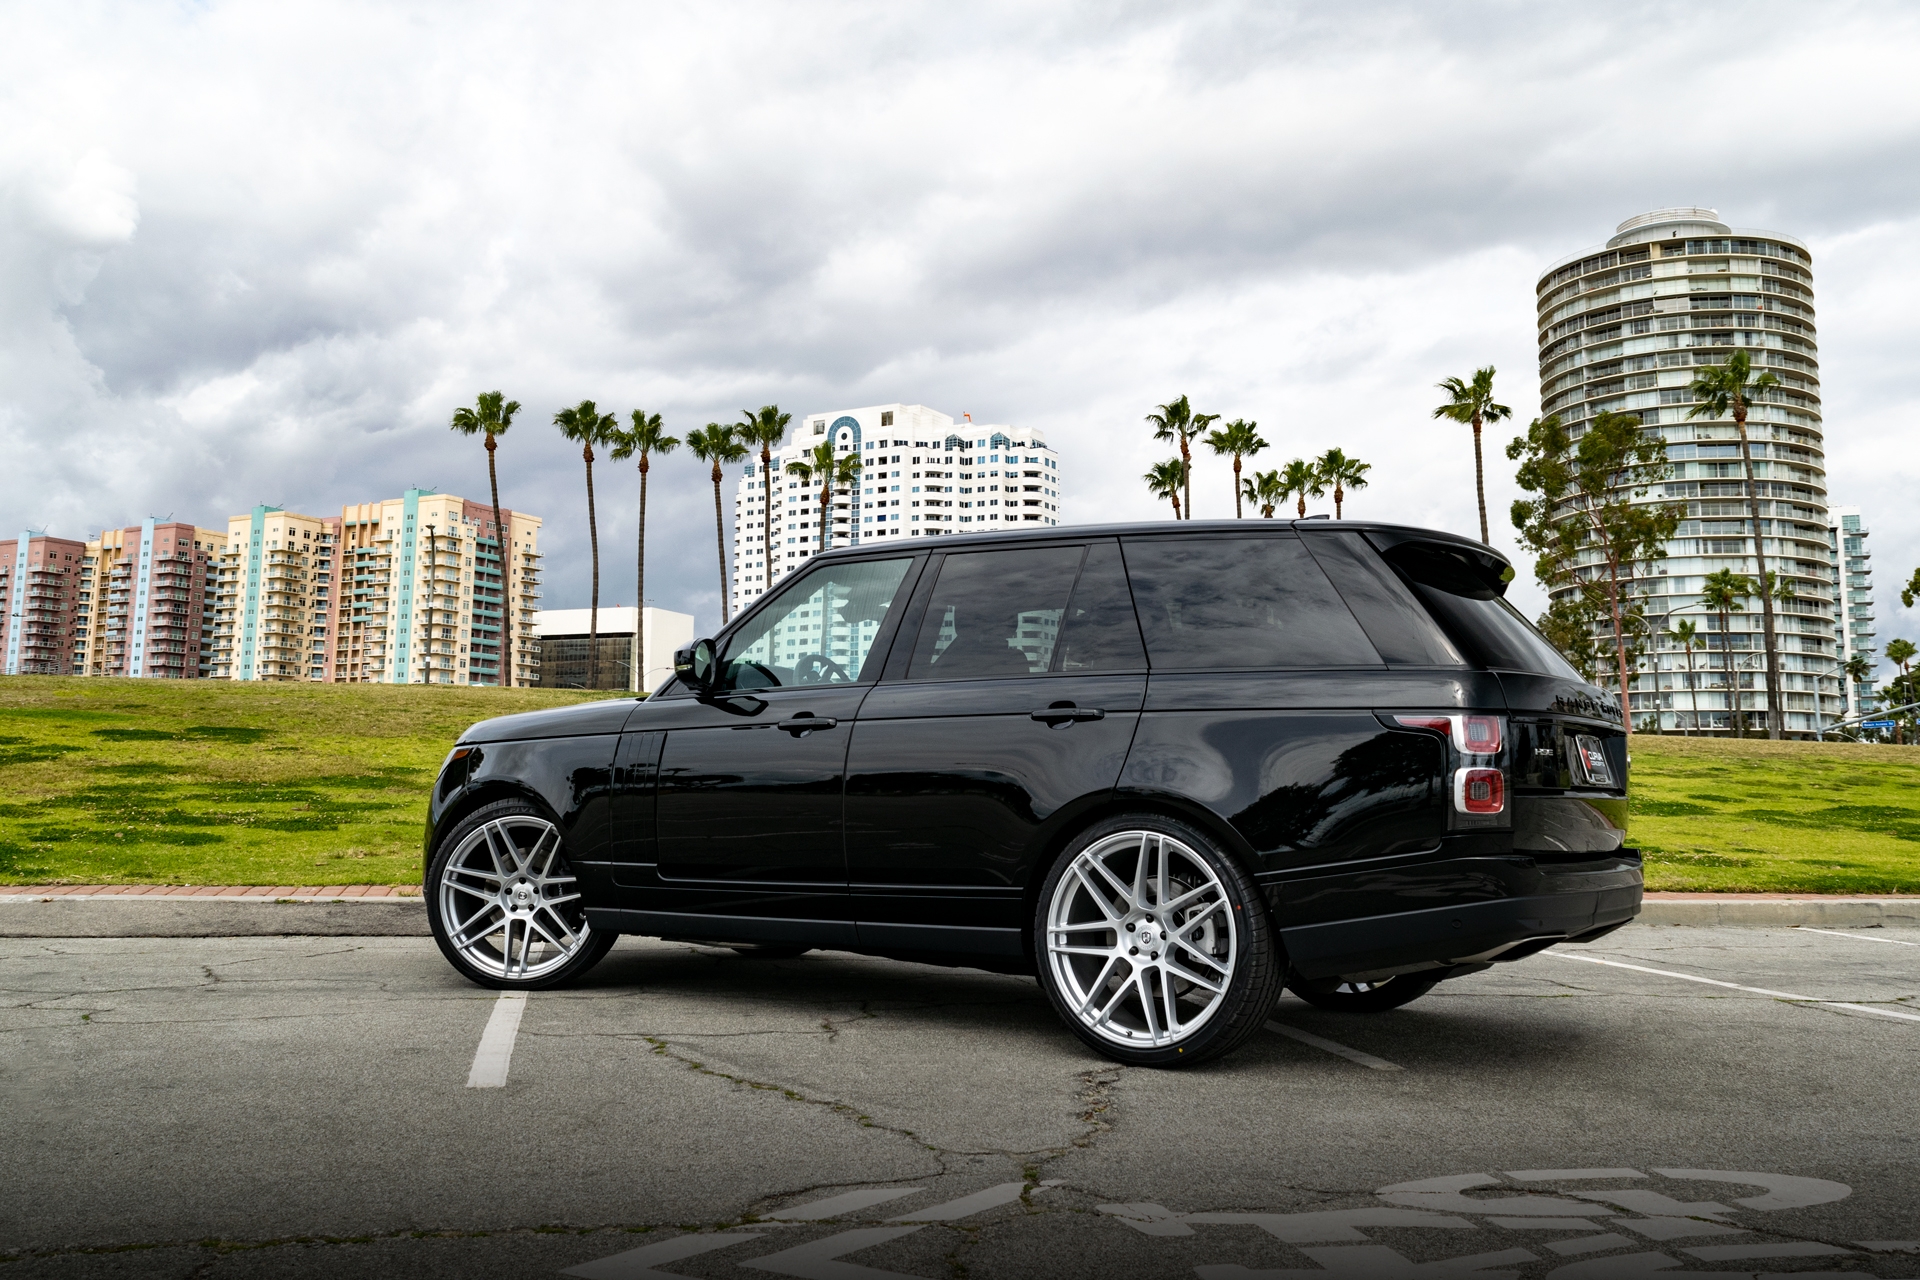 Curva Concepts C300 Aftermarket Wheels on a Range Rover HSE